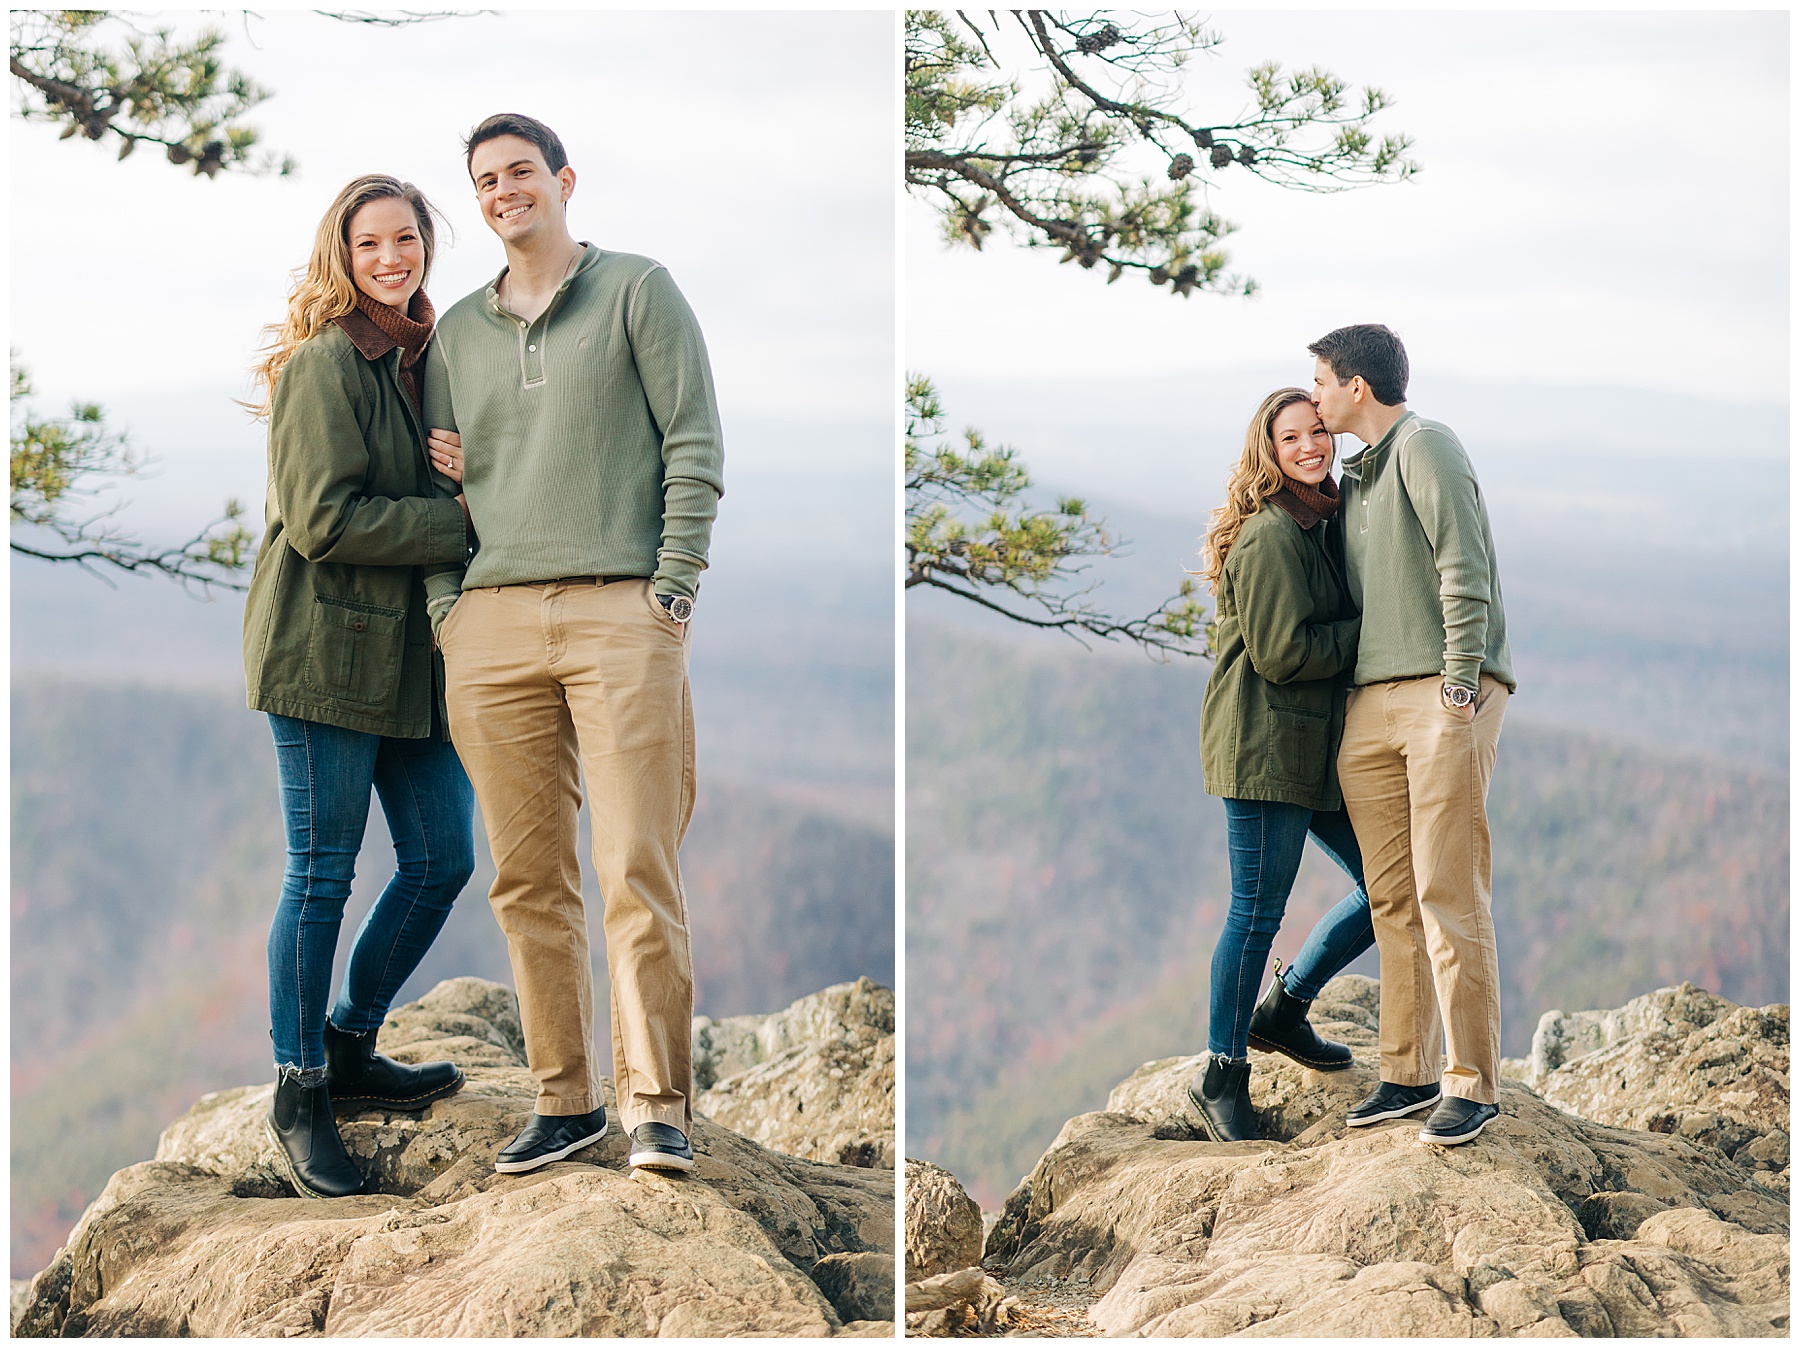 Ravens Roost Engagement Session by Virginia Wedding Company